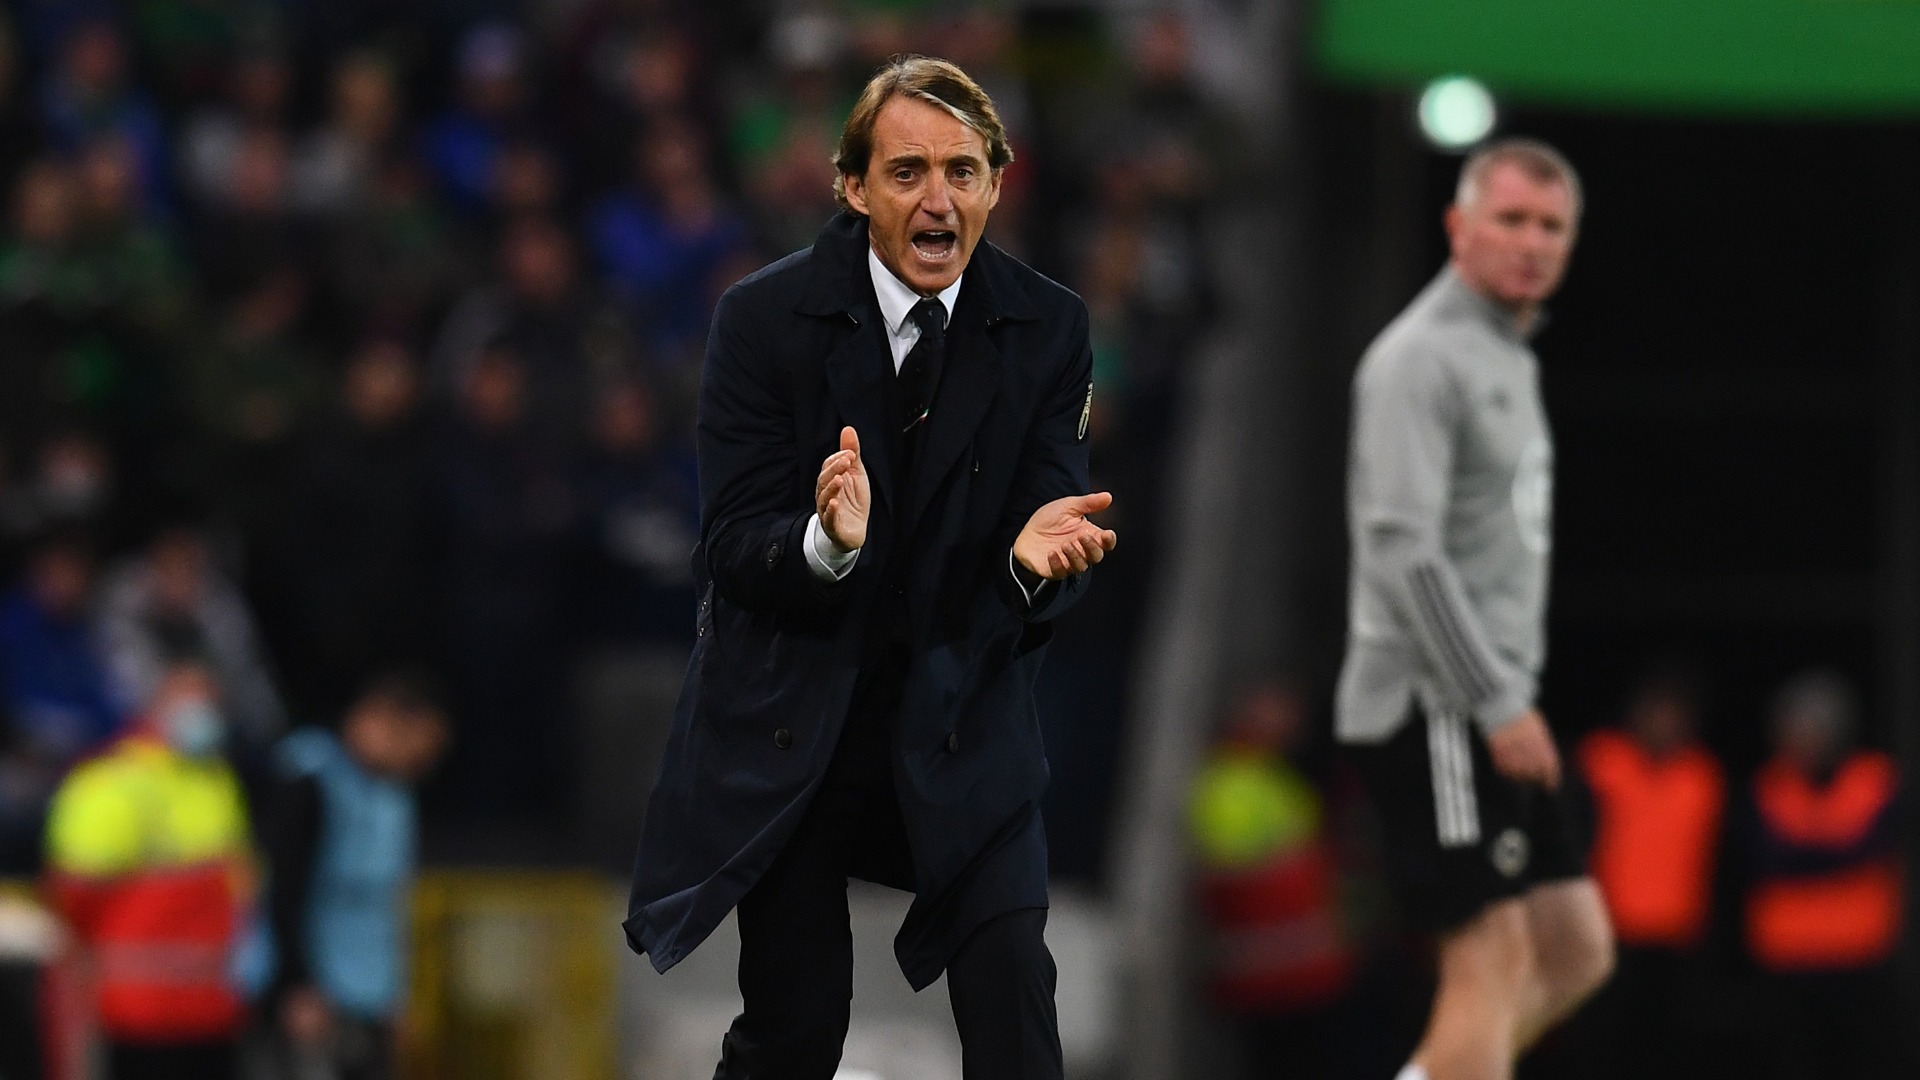 Mancini 'completely confident' Italy will make Cup